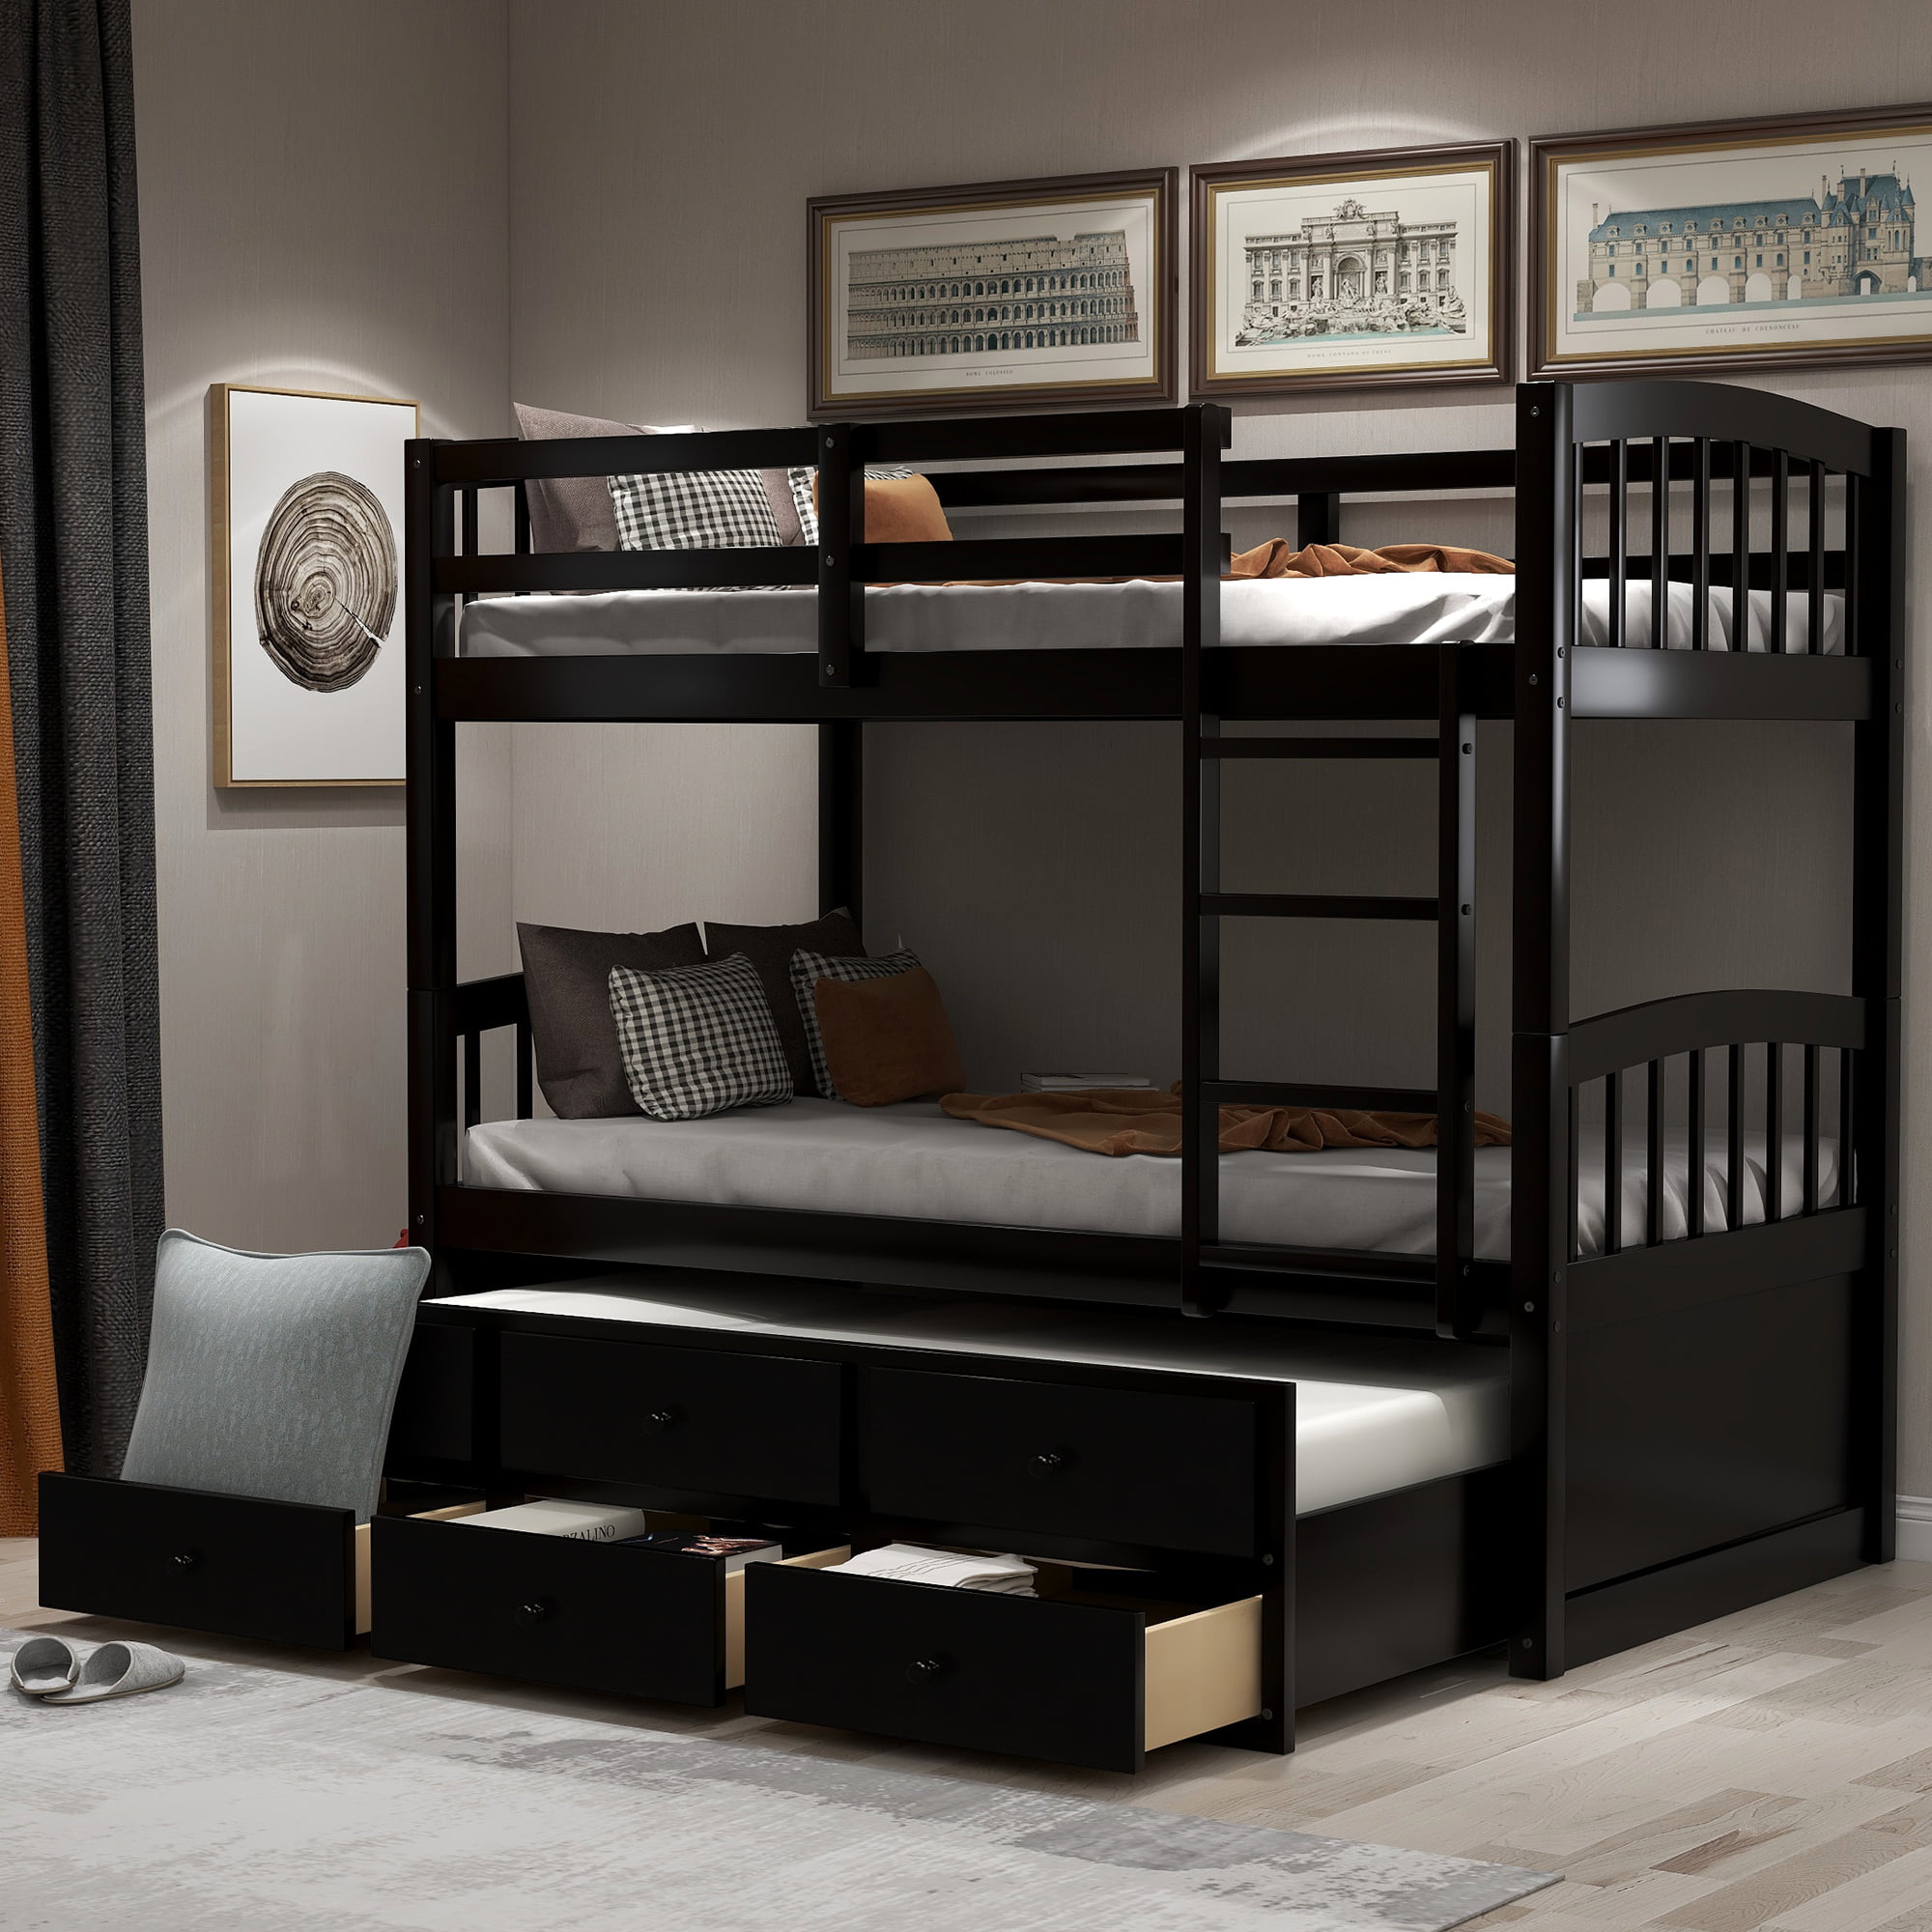 Twin Over Bunk Beds Solid Wood, Teenager Bunk Beds